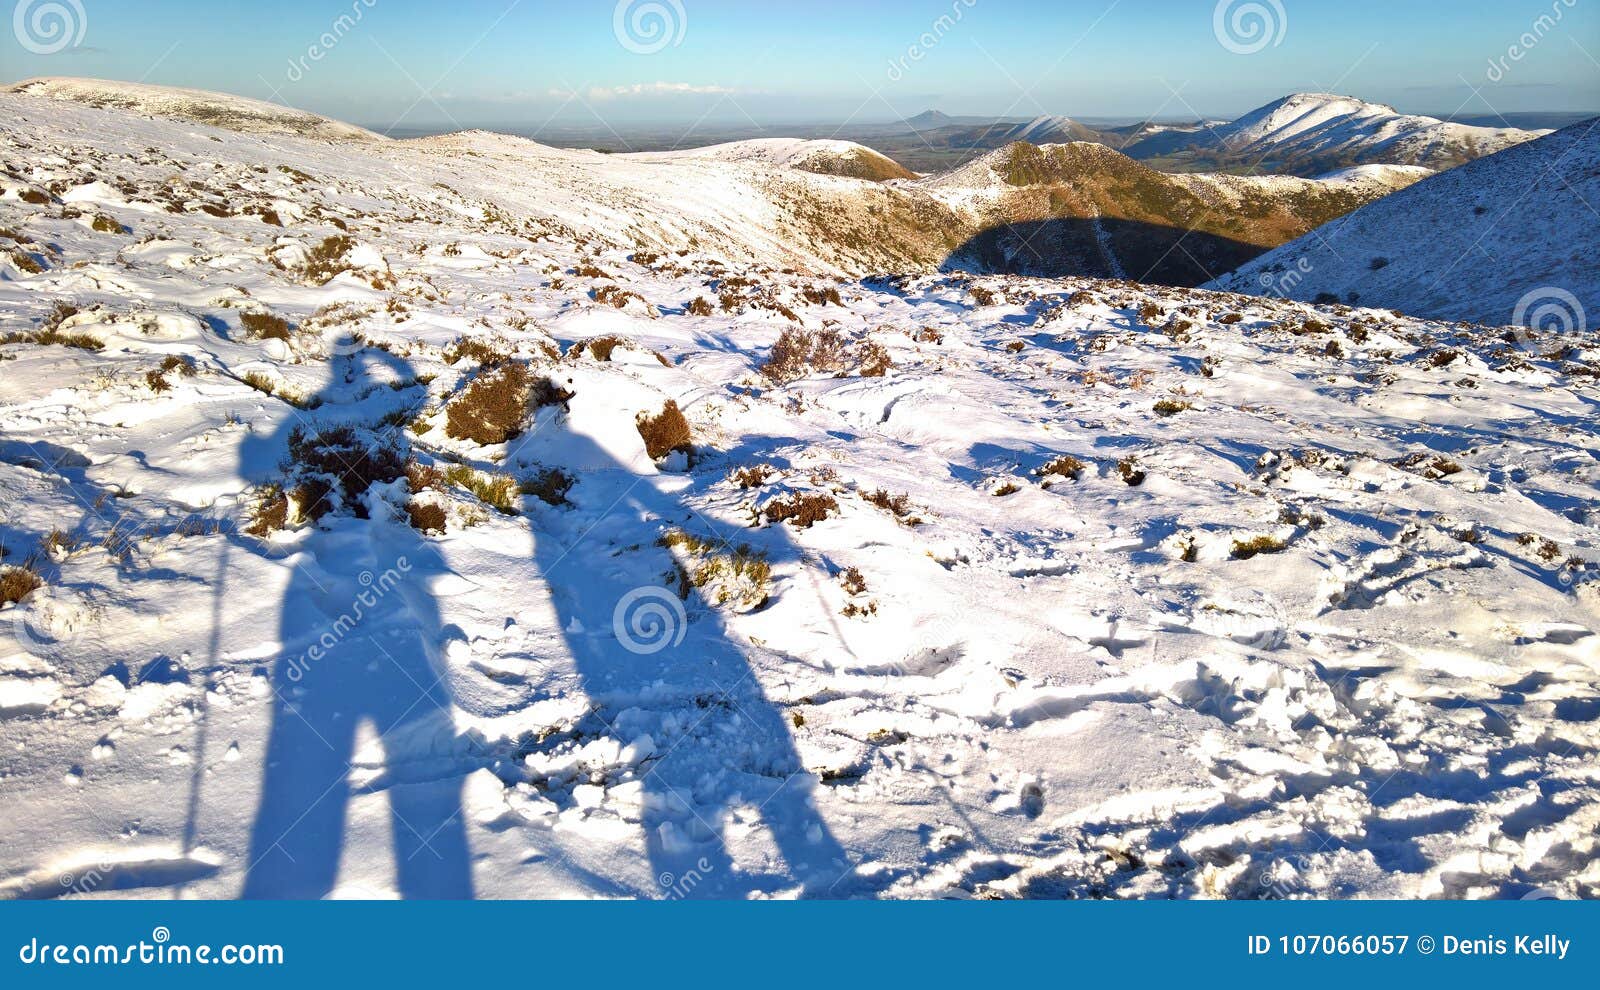 hill walkers in winter snow in england